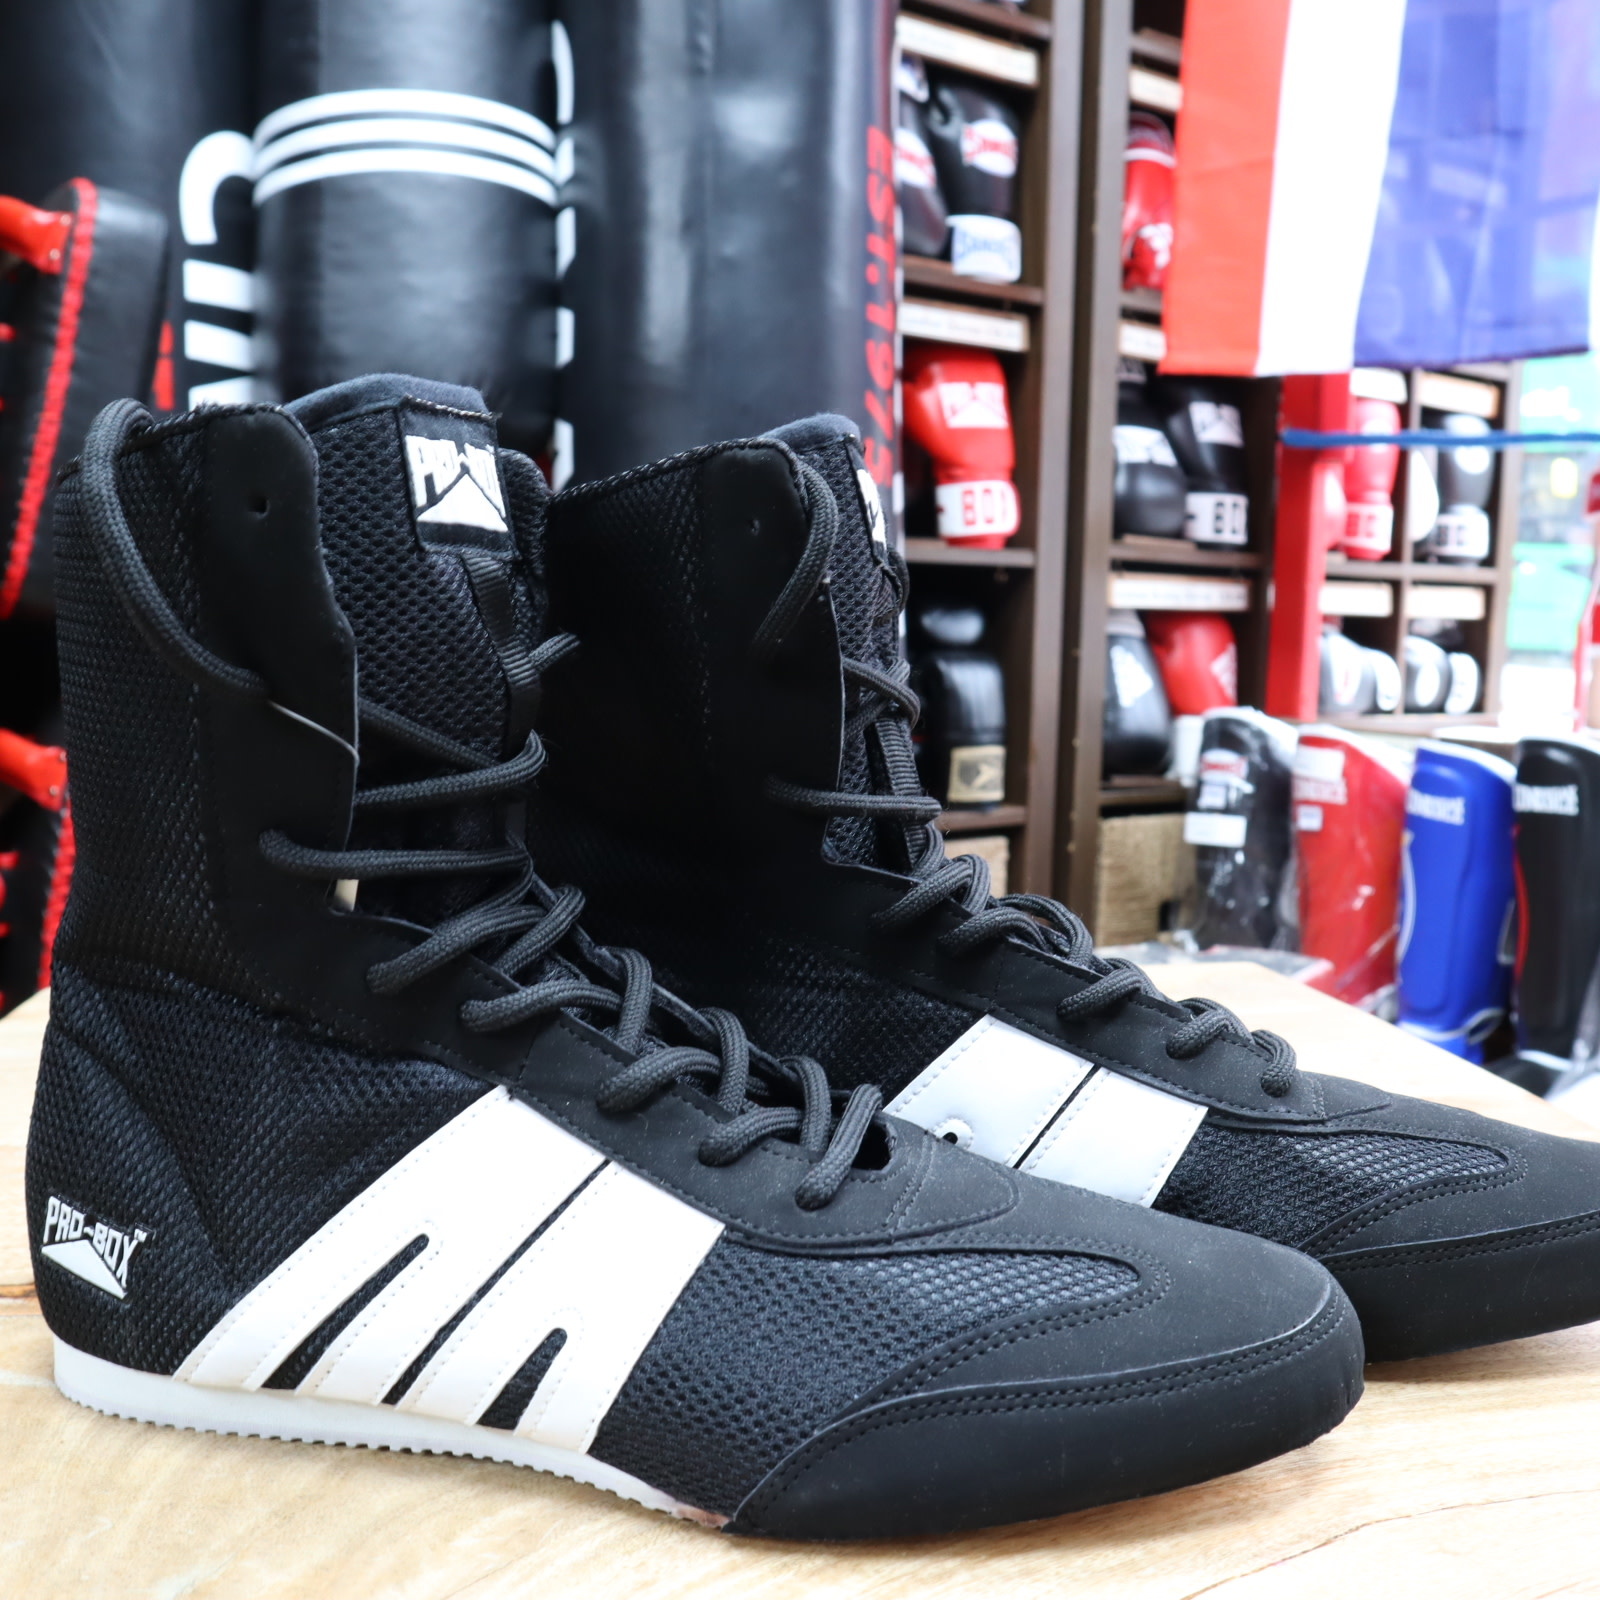 Pro Box Junior Boxing Boots Kids Boys Girls Gym Training Sparring Shoes Boots 